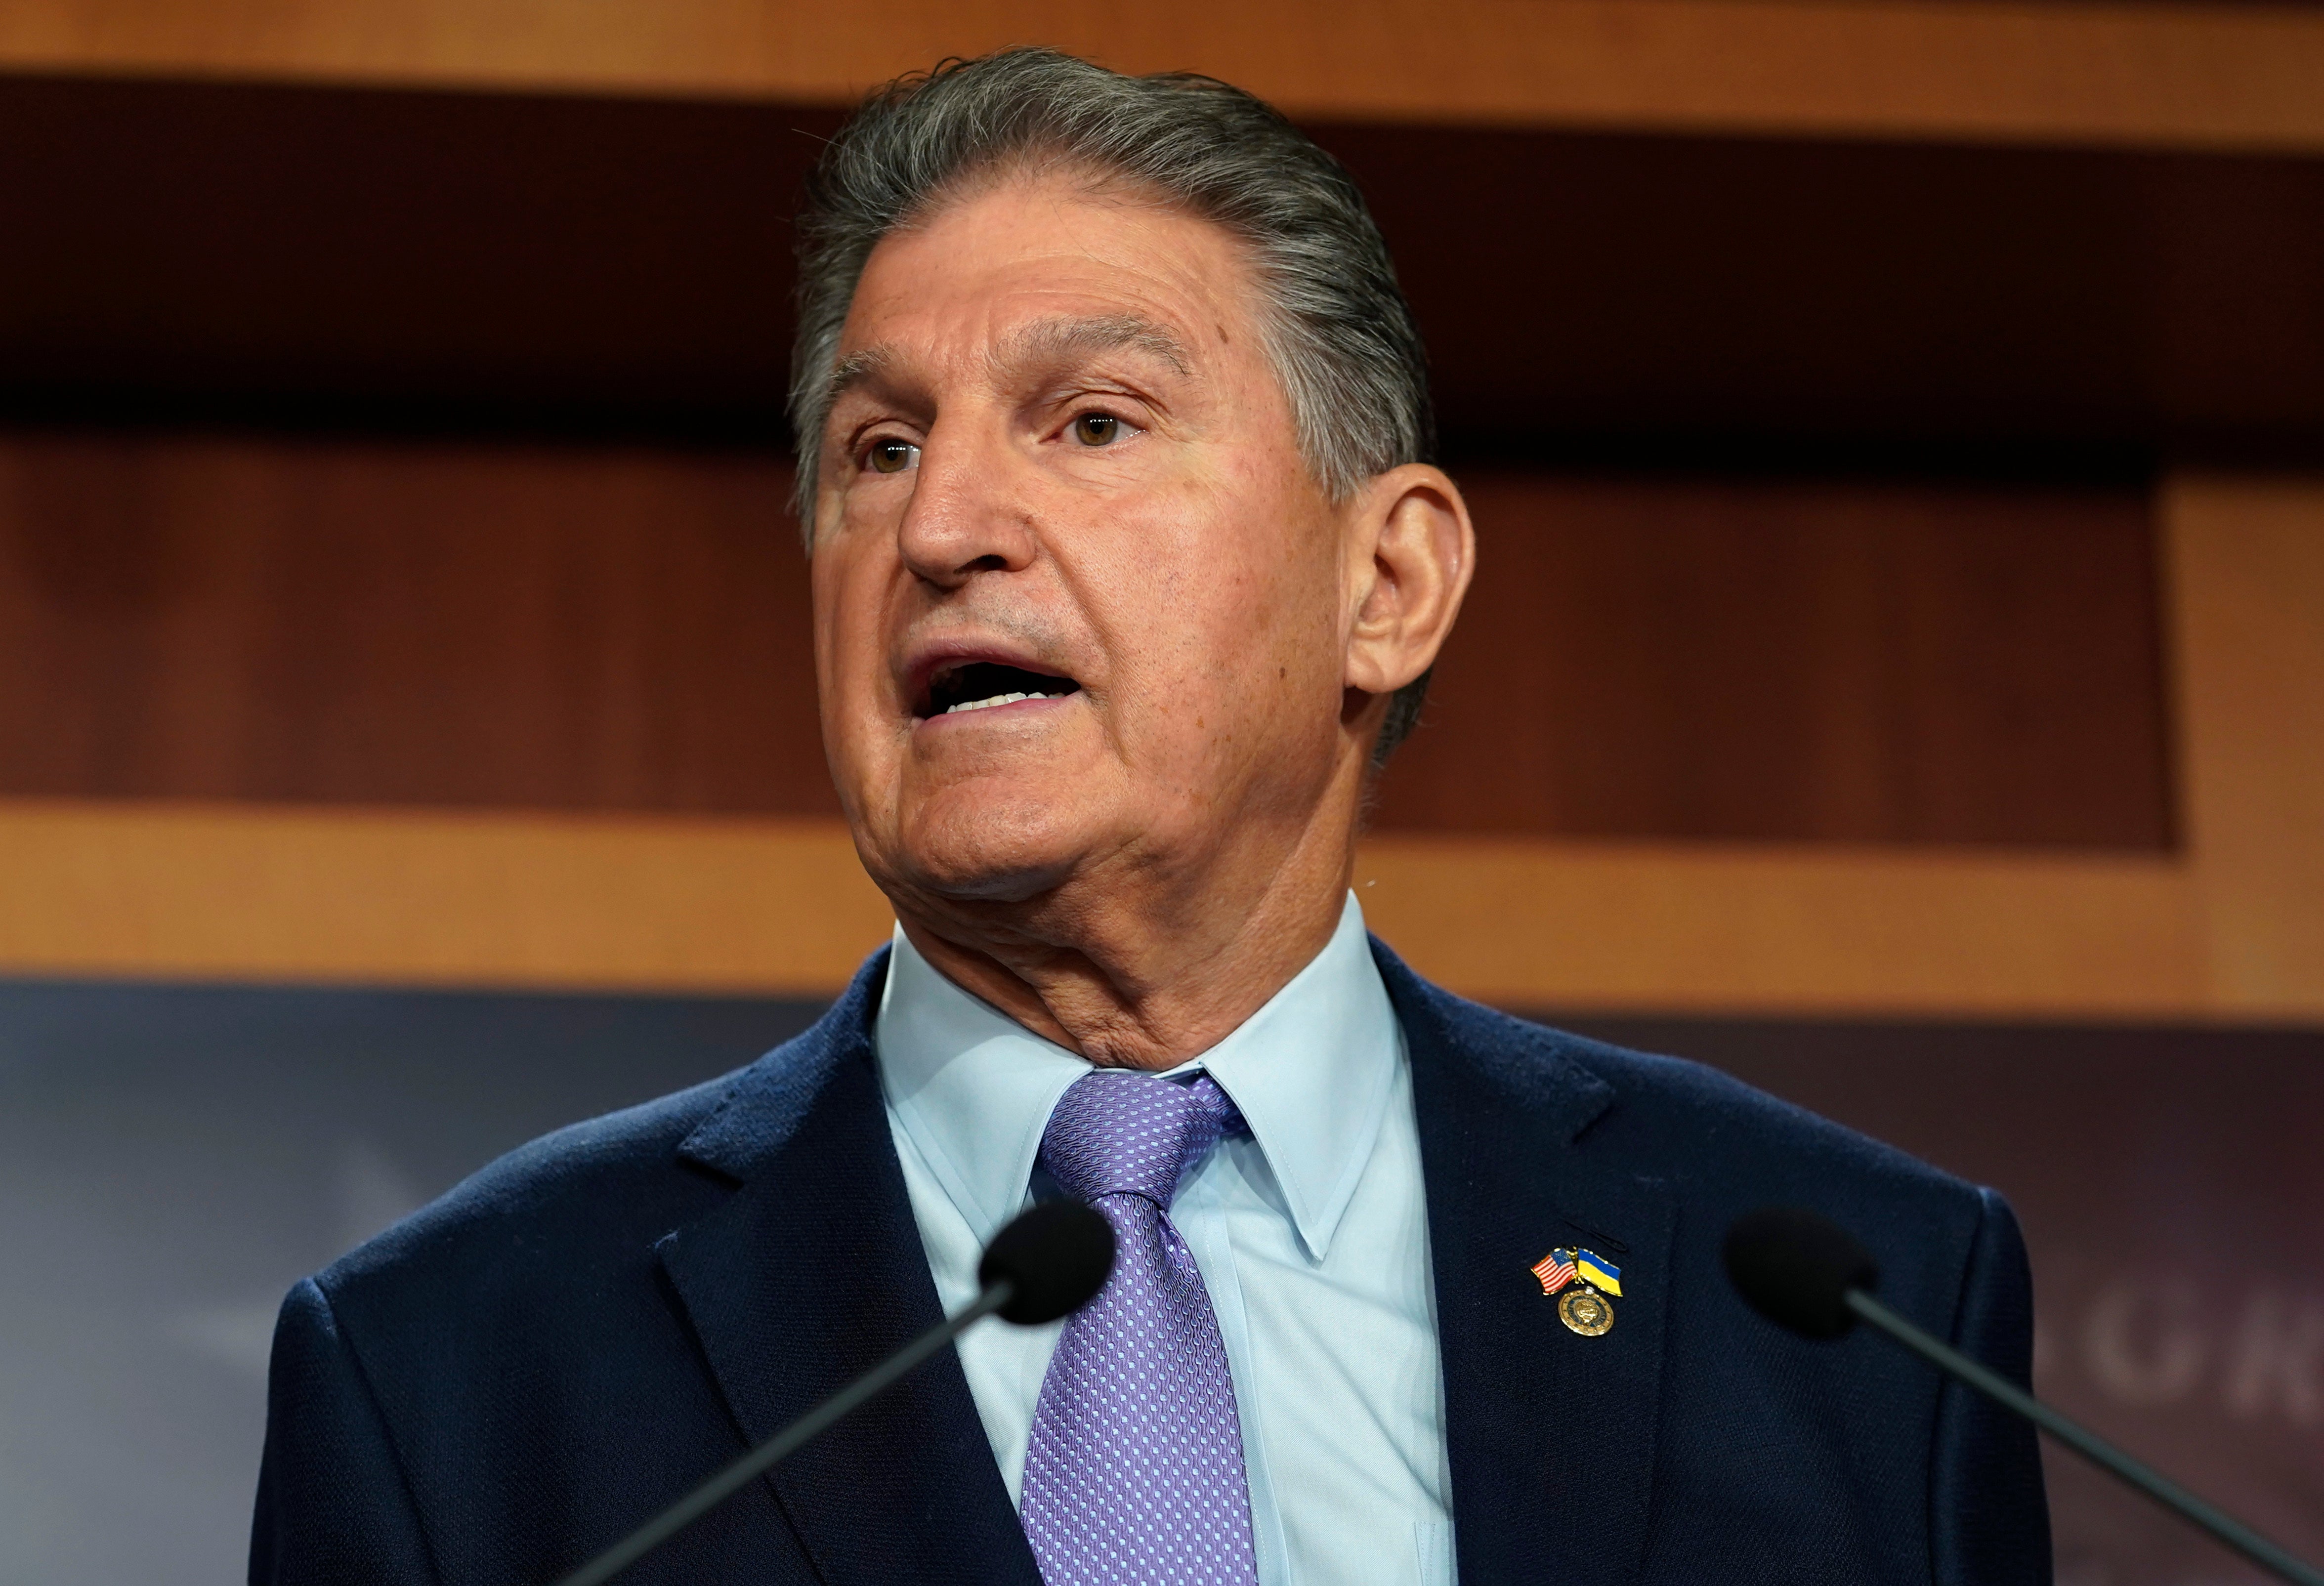 Sen. Joe Manchin, D-W.Va., speaks during a news conference Sept. 20, 2022, at the Capitol in Washington.